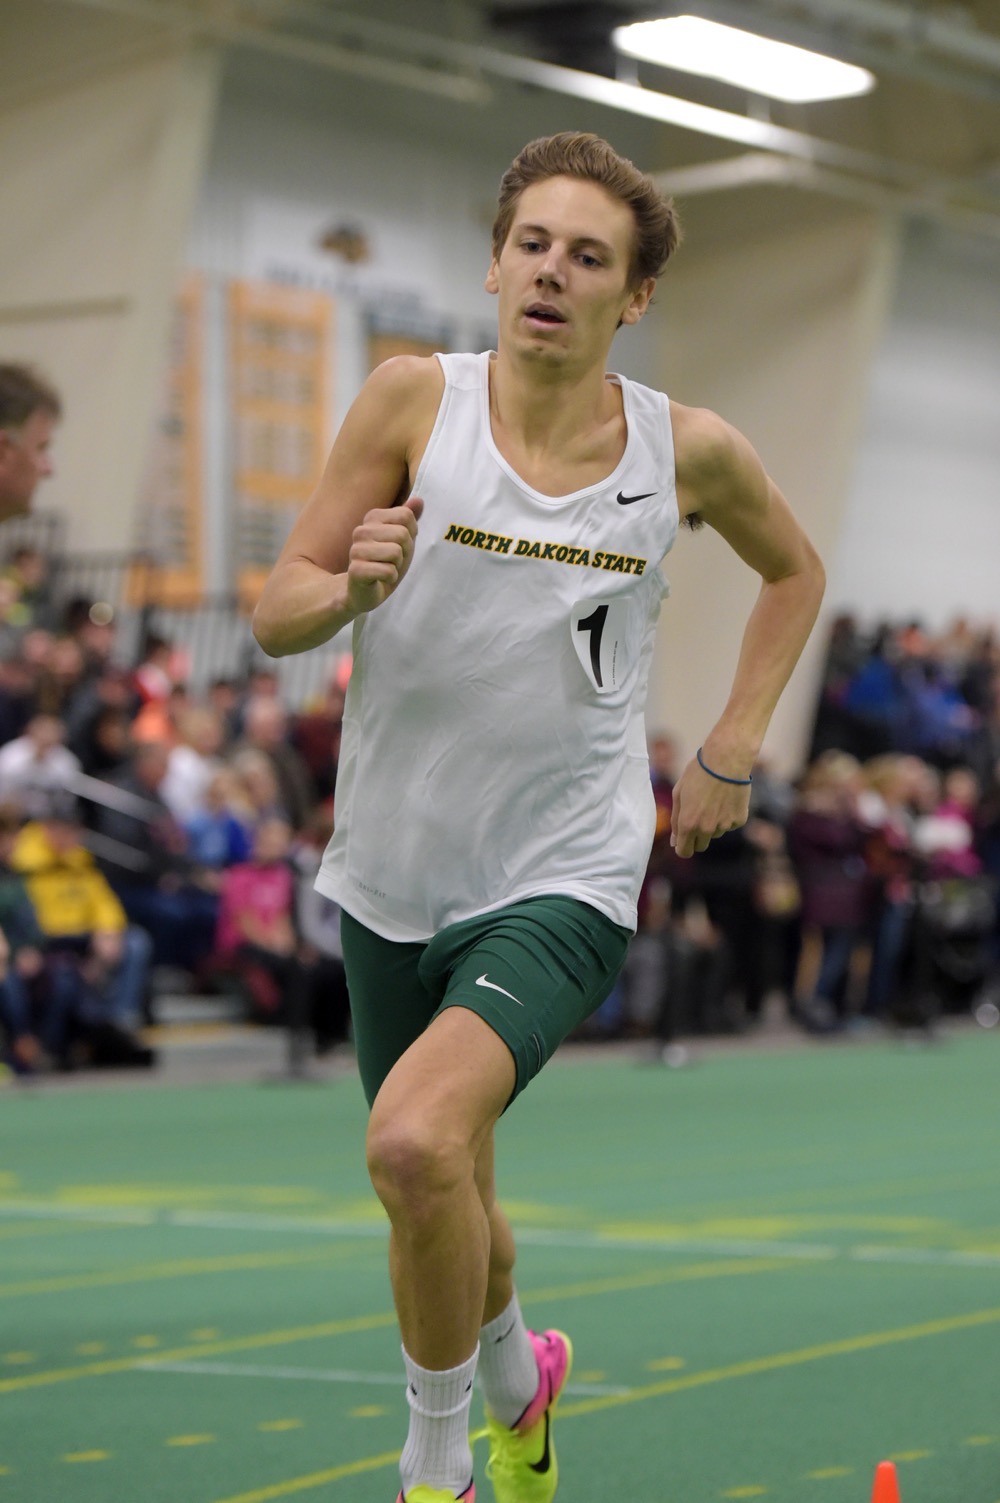 Jake Leingang Track and Field